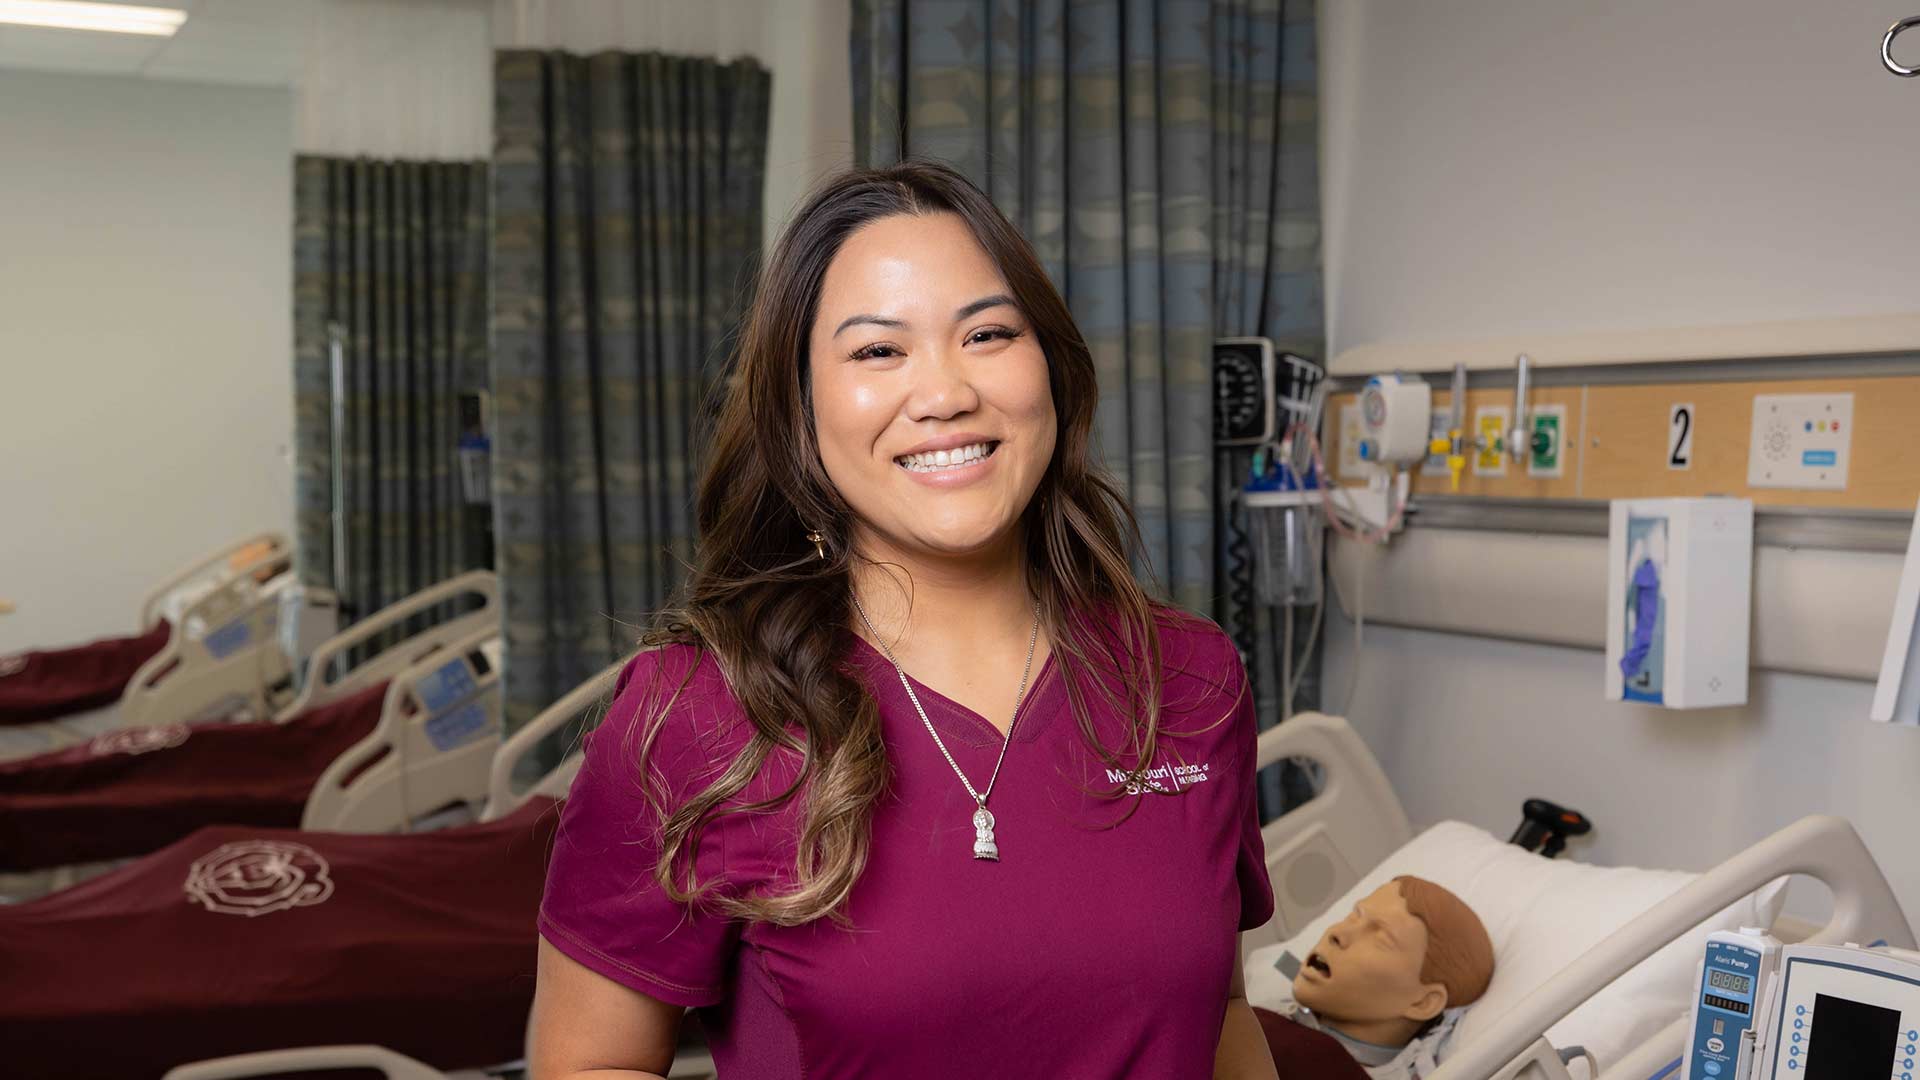 A nursing student in maroon scrubs smiles while posing in the simulation lab.